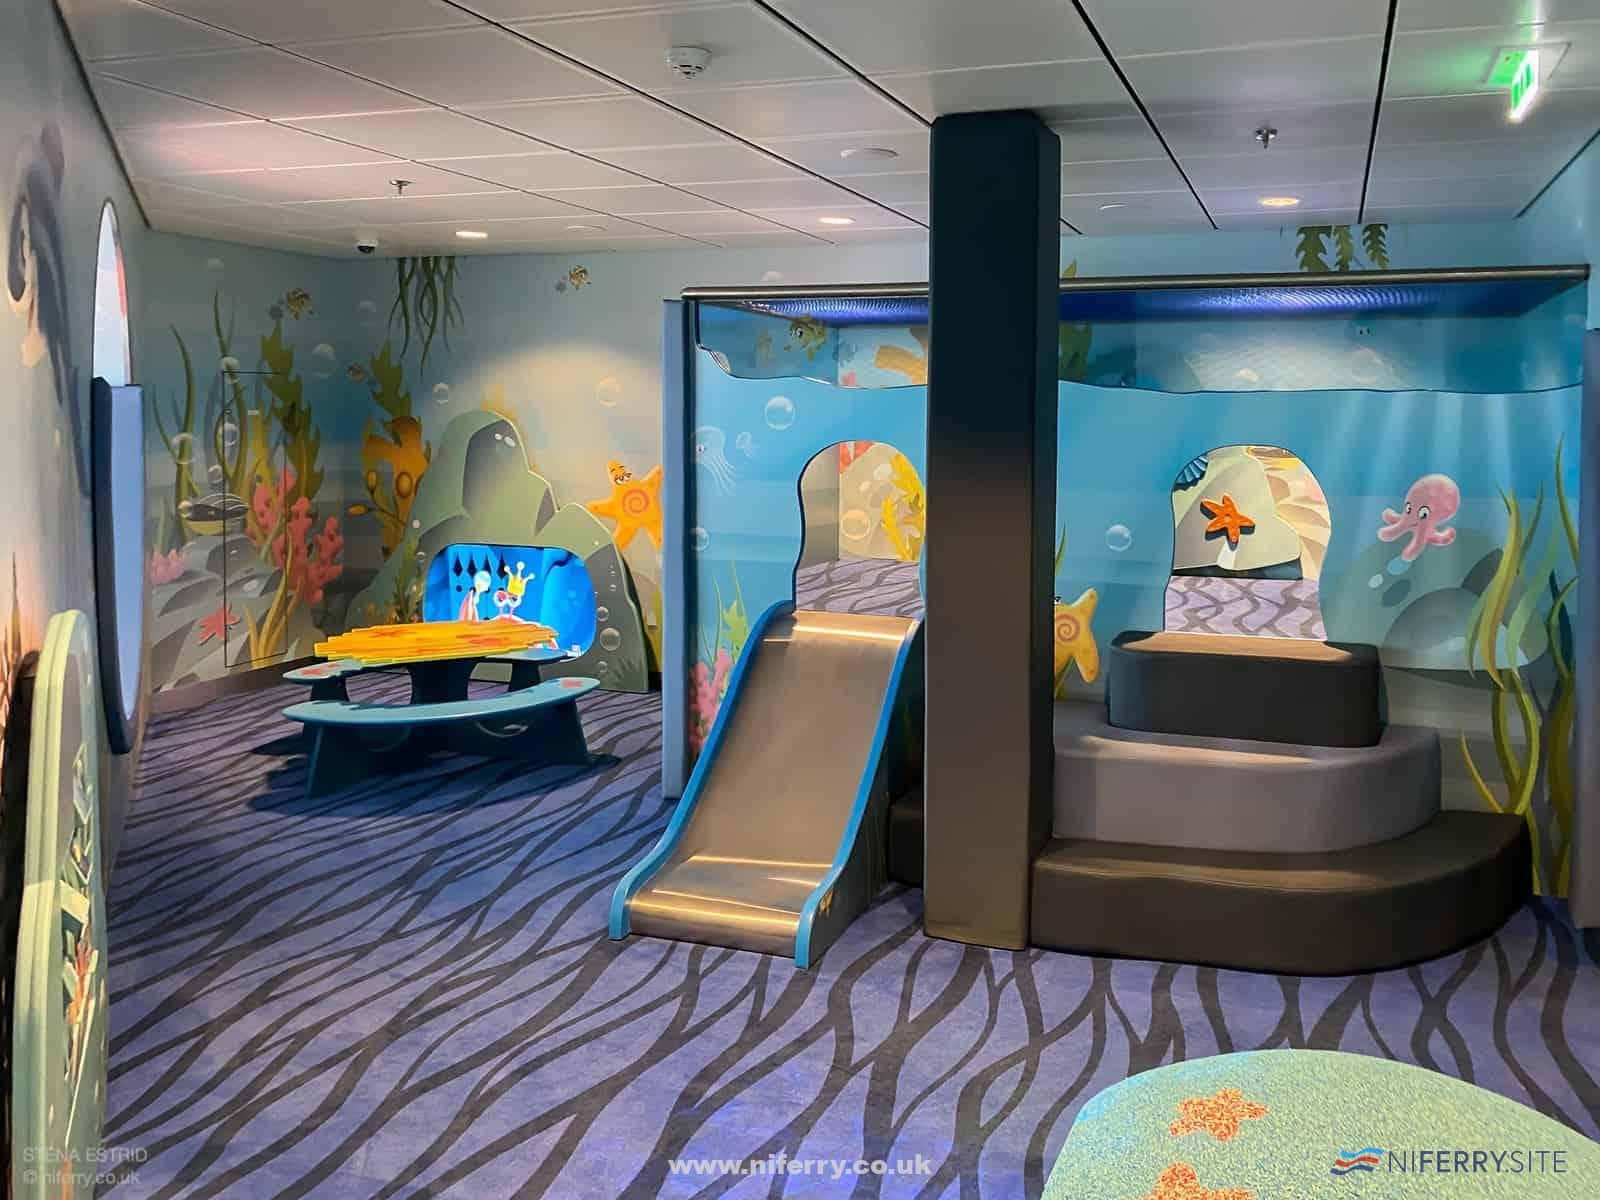 Insidede 'Happy World', Deck 8. This is the second of the two children's play areas. © niferry.co.uk